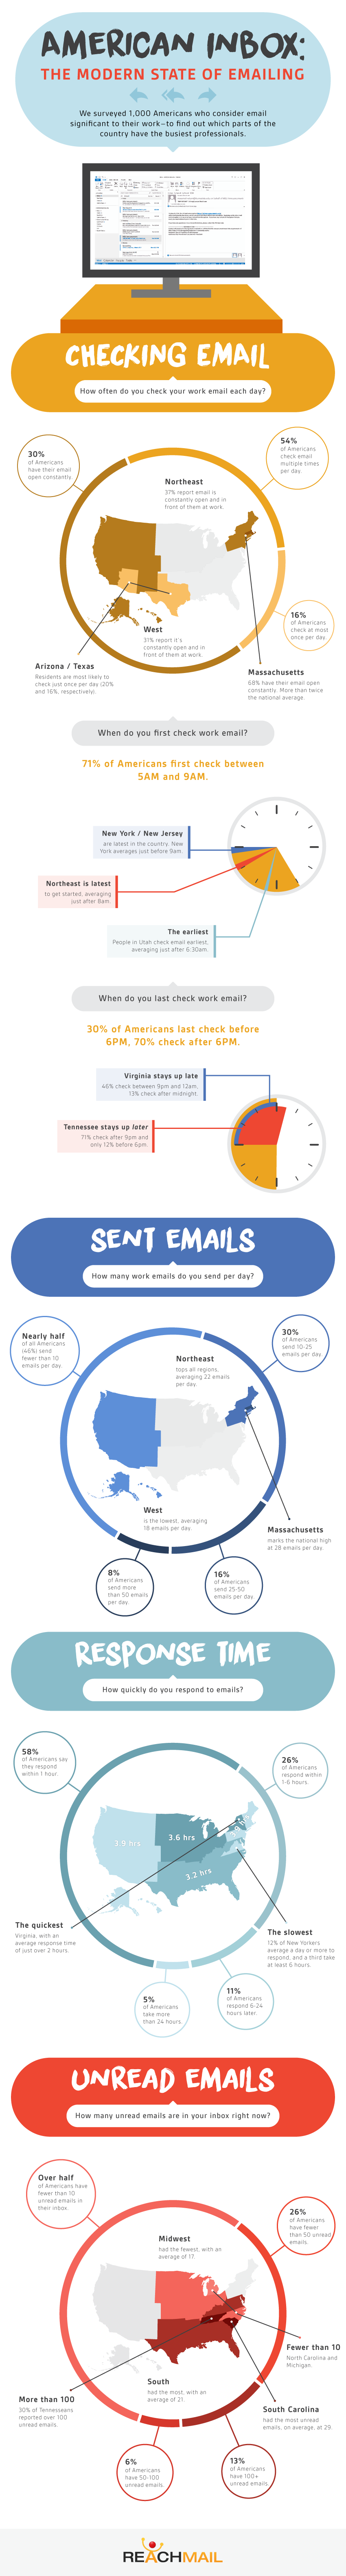 America’s Relationship With Work Email